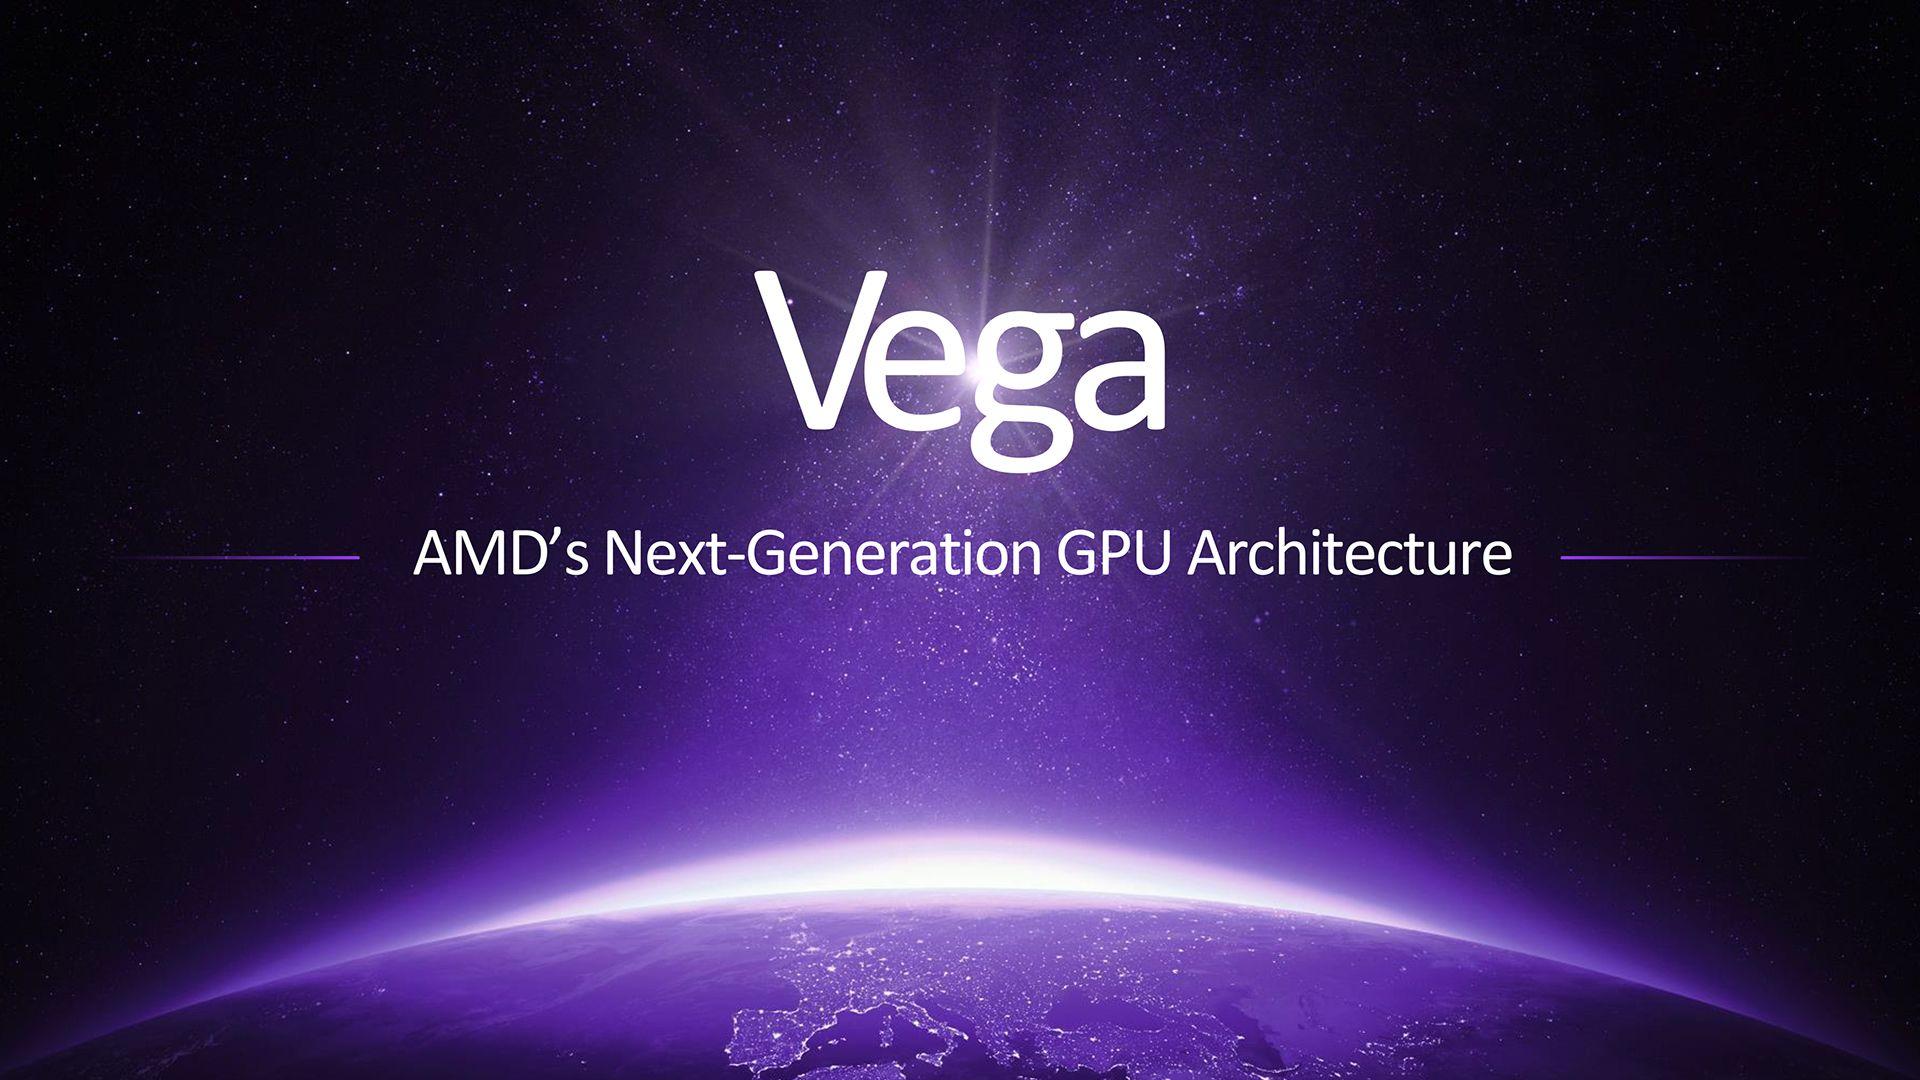 AMD's Radeon RX Vega graphics cards likely won't launch until August